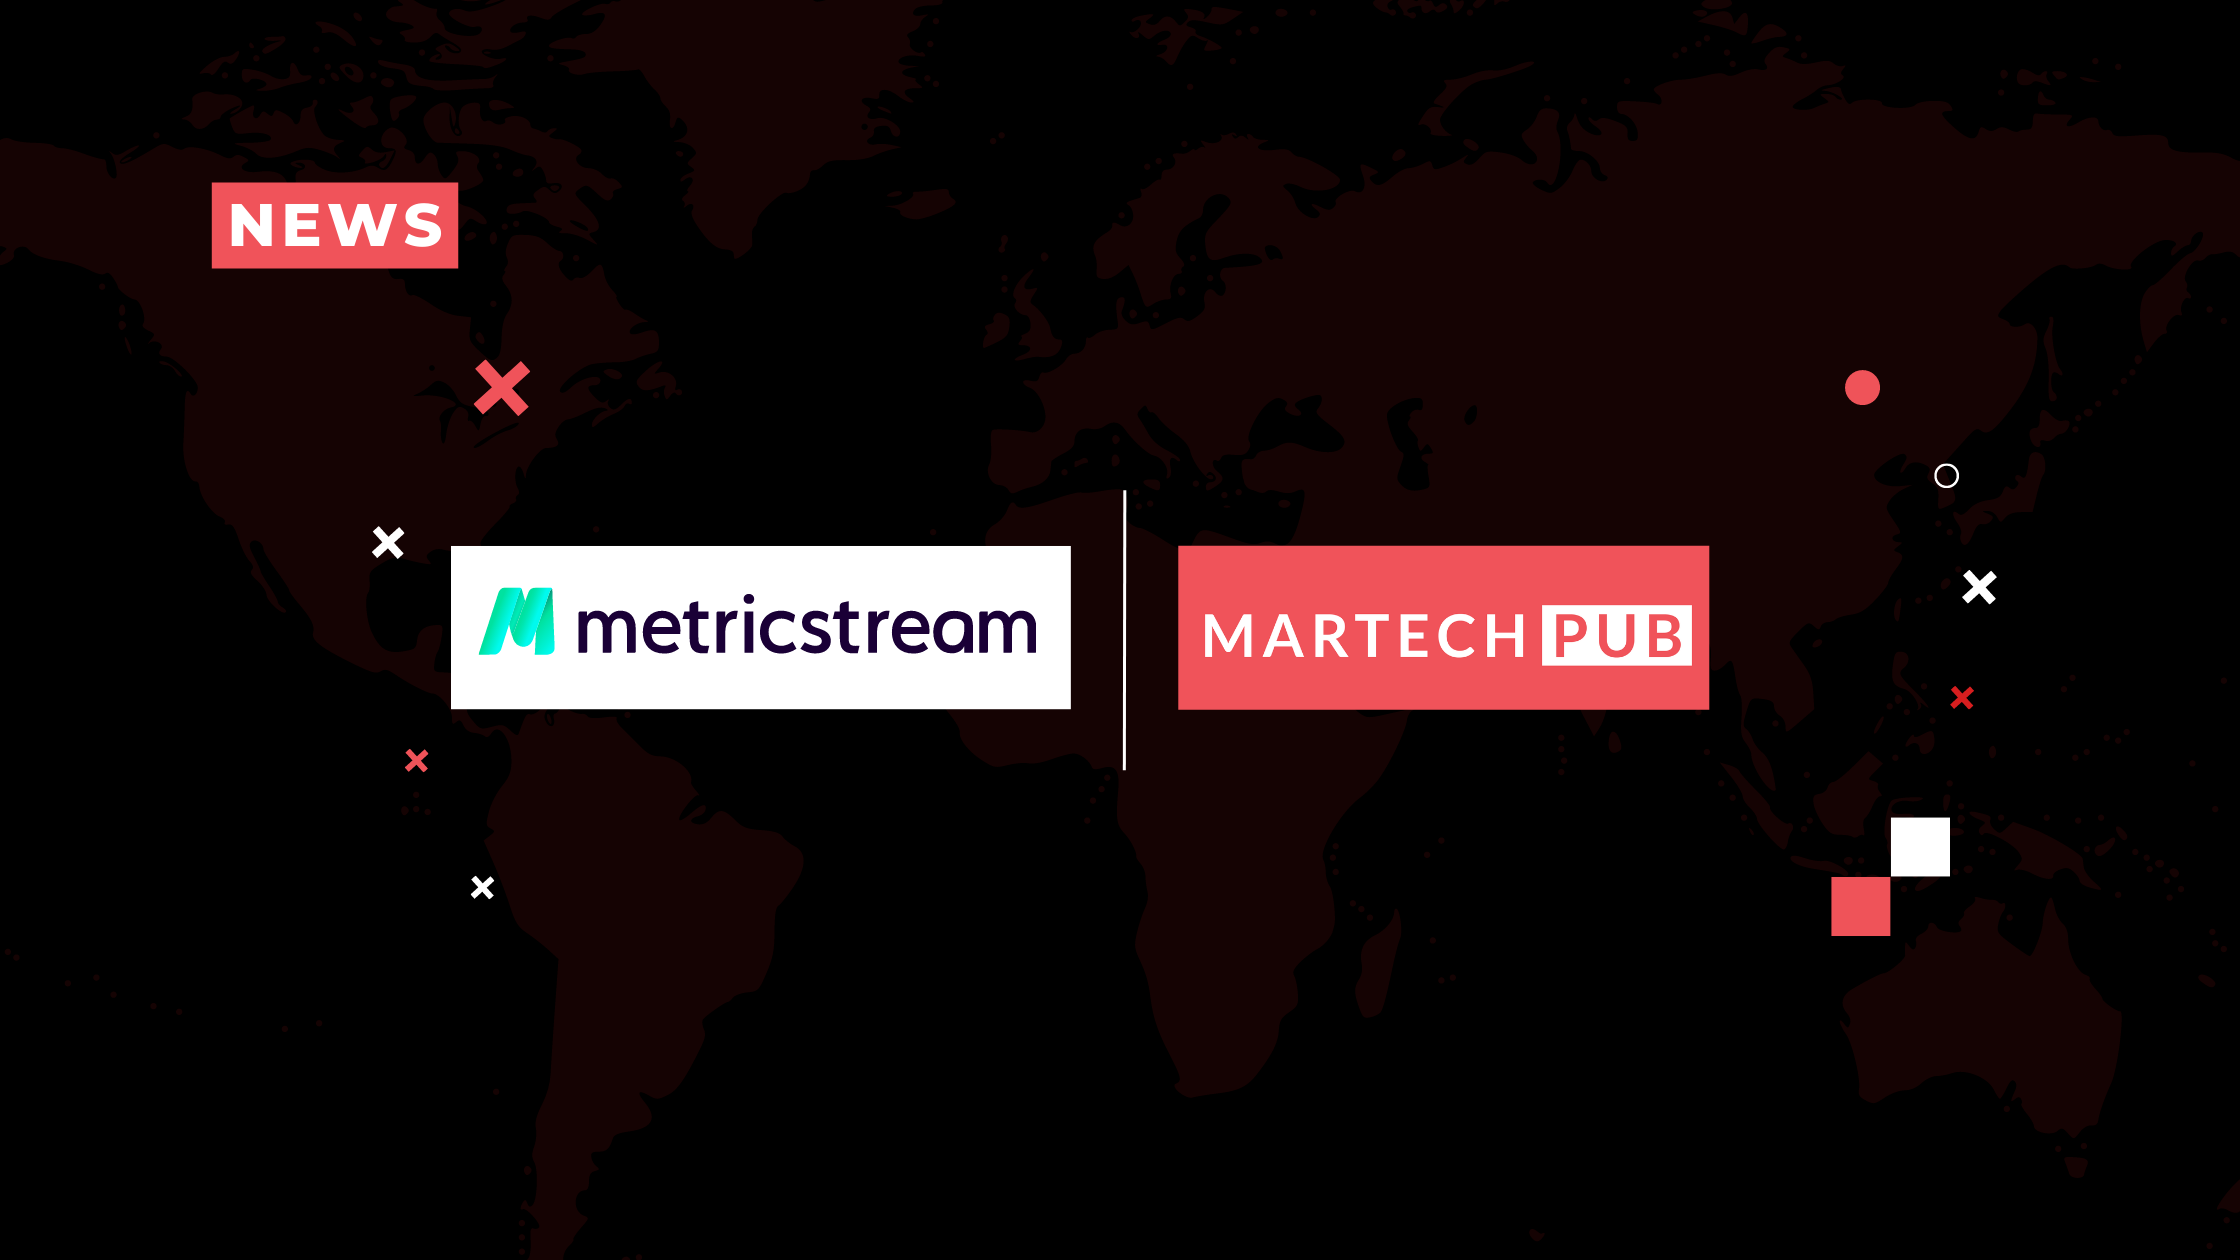 The US GRC Summit for MetricStream will start on June 14 and 15